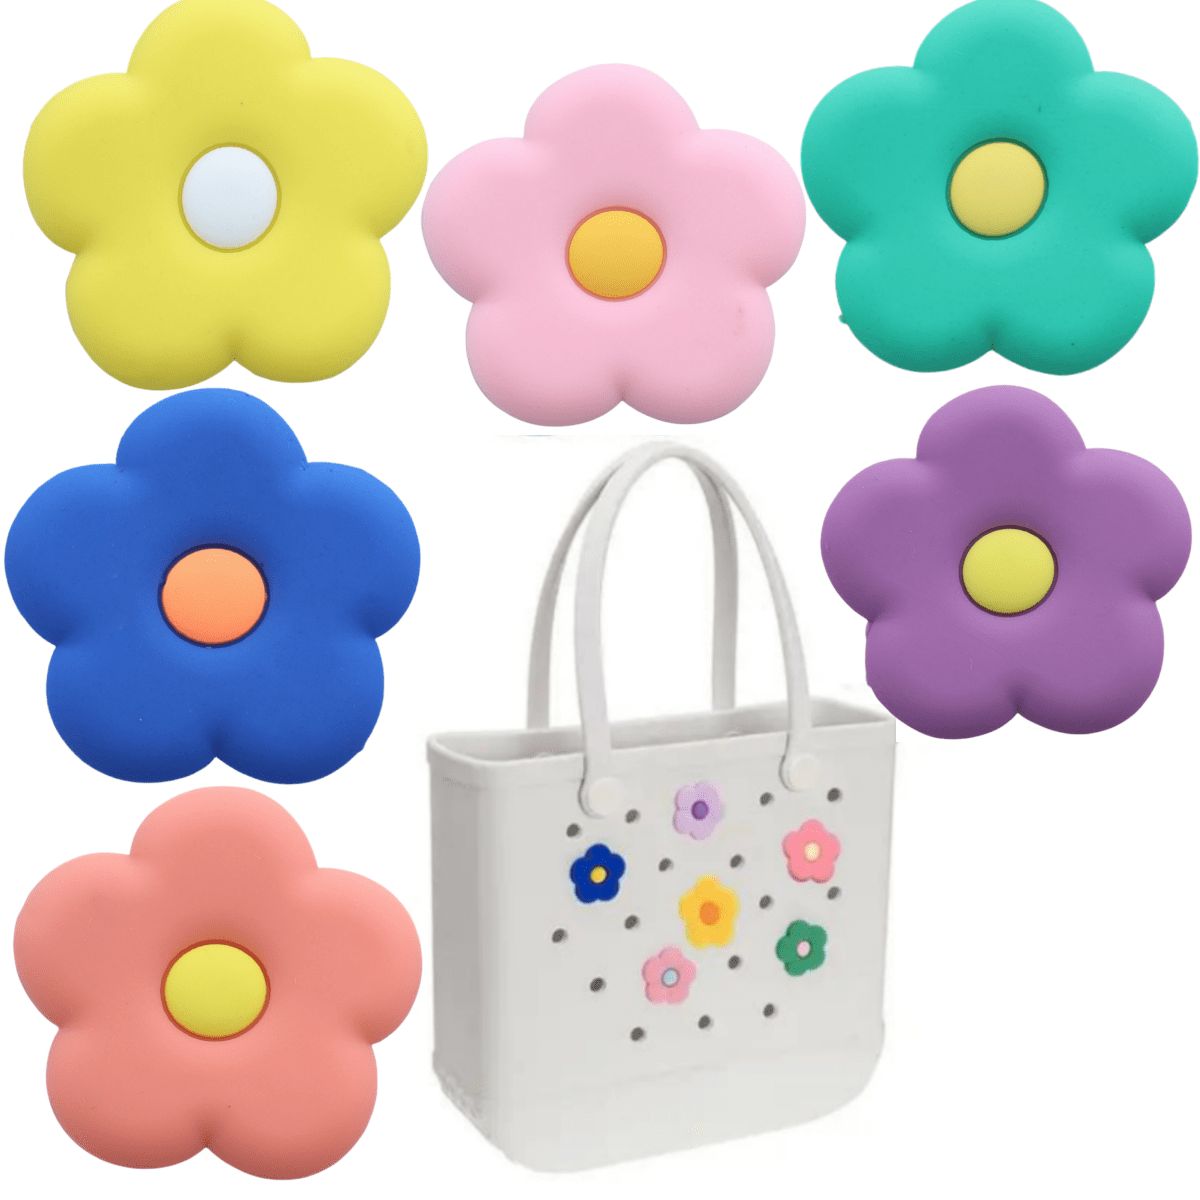 6 Pcs Cartoon Flower Charms Inserts For Bag, Silicone Lightweight Accessories Decorations For Bag... | SHEIN